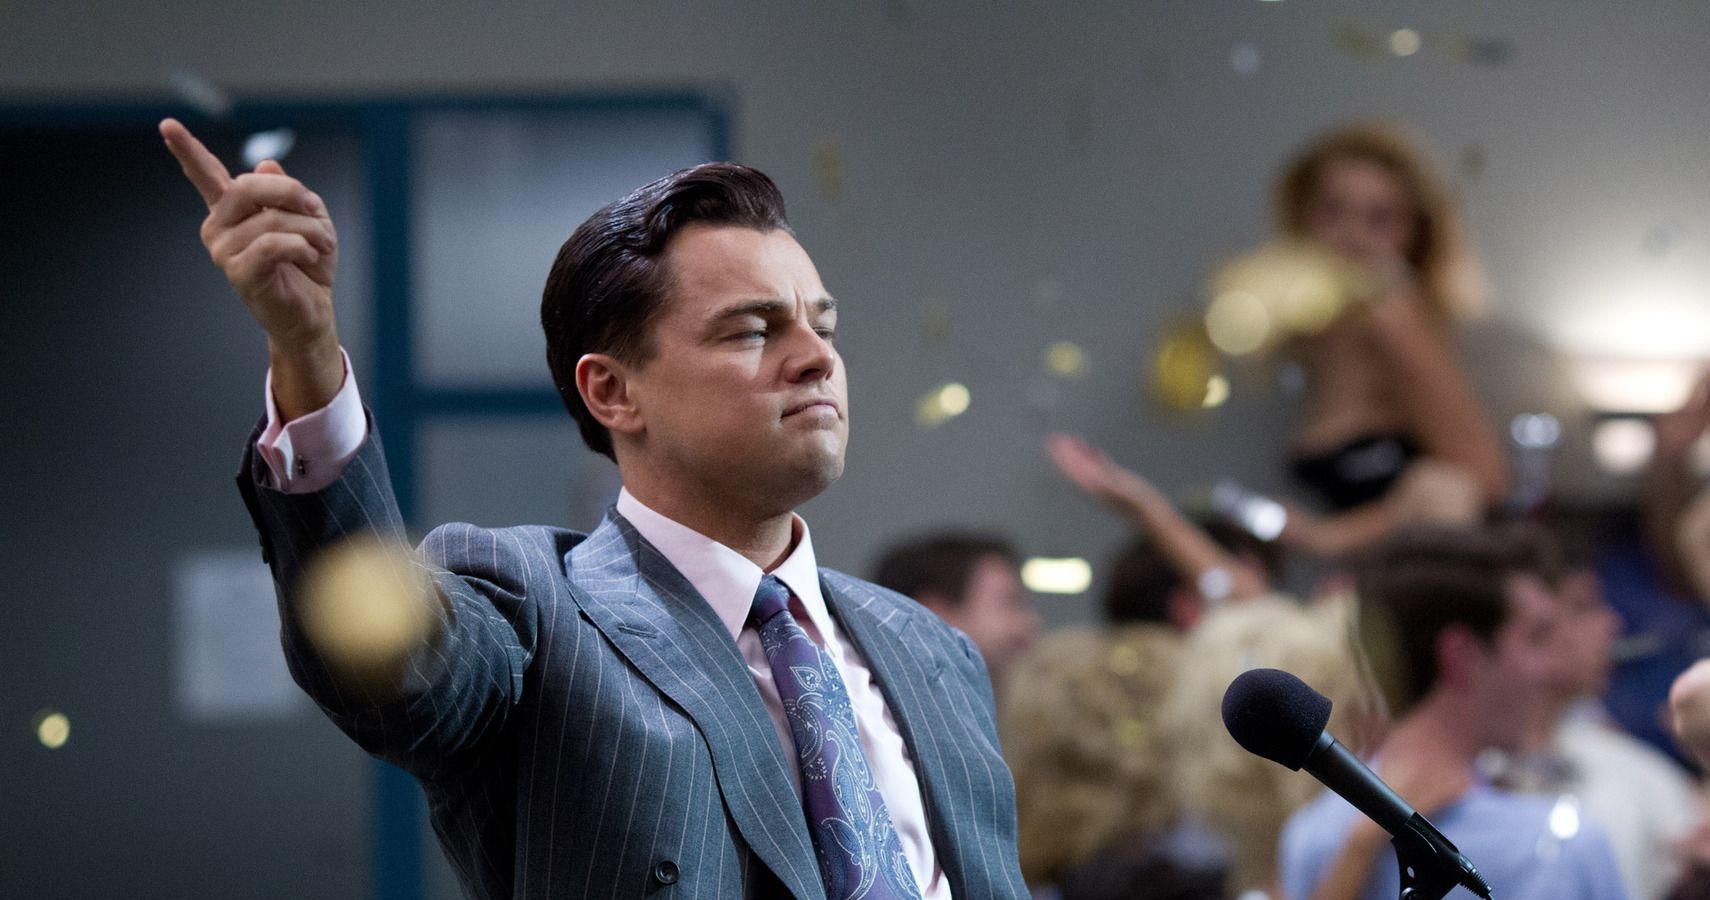 Wolf Of Wall-Street: 10 Hidden Details You Completely Missed In The Film